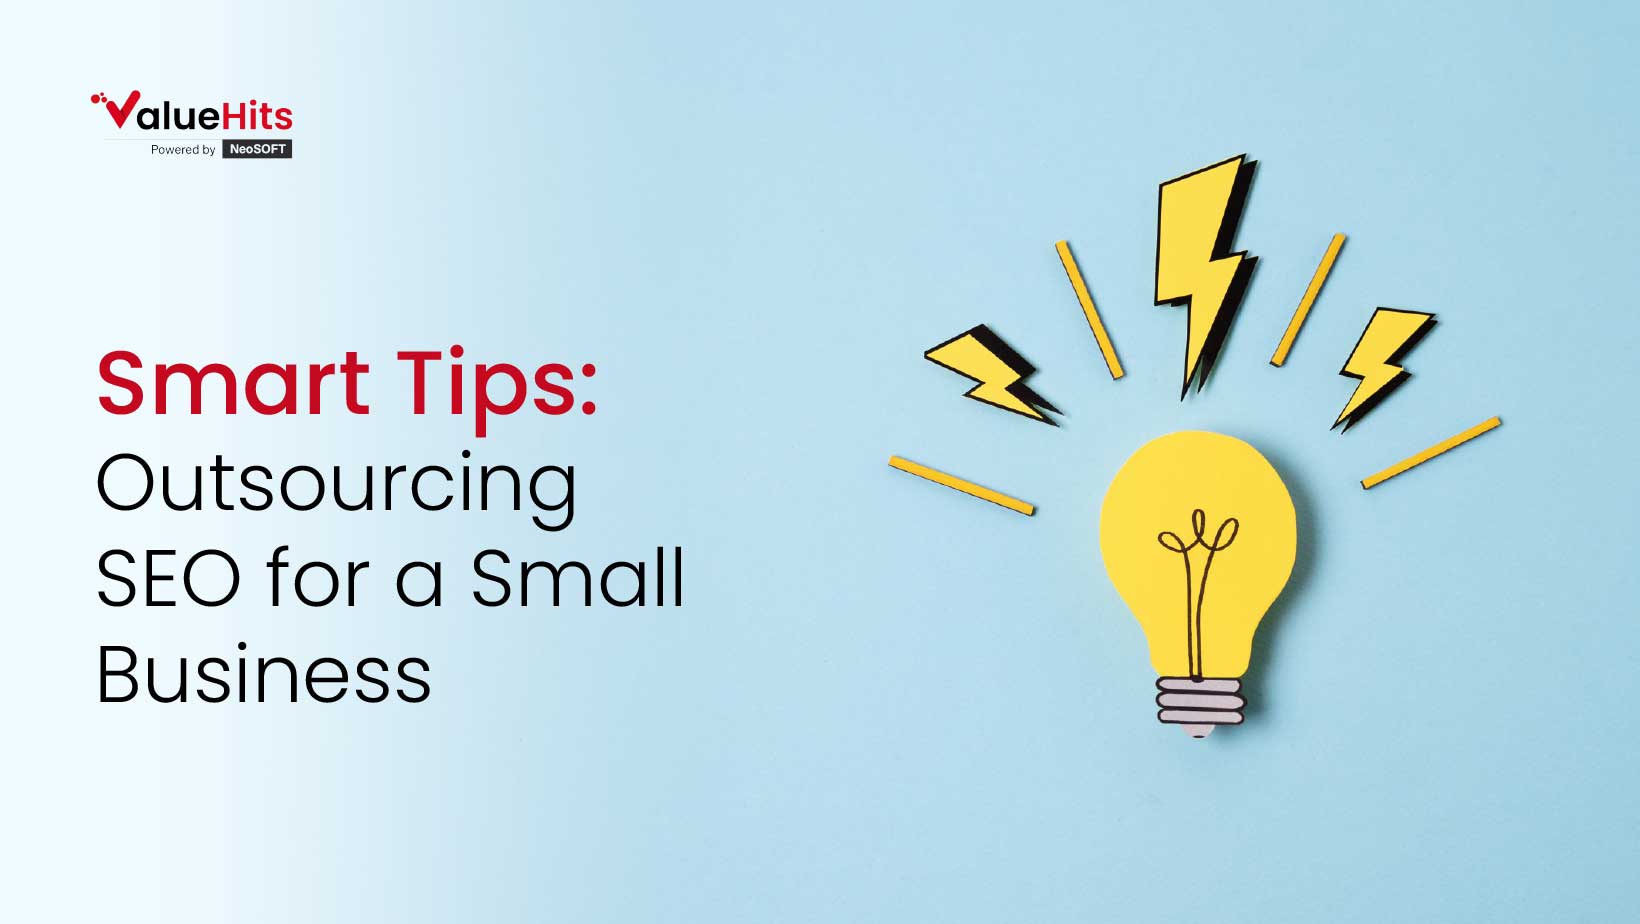 Smart Tips: Outsourcing SEO for a Small Business